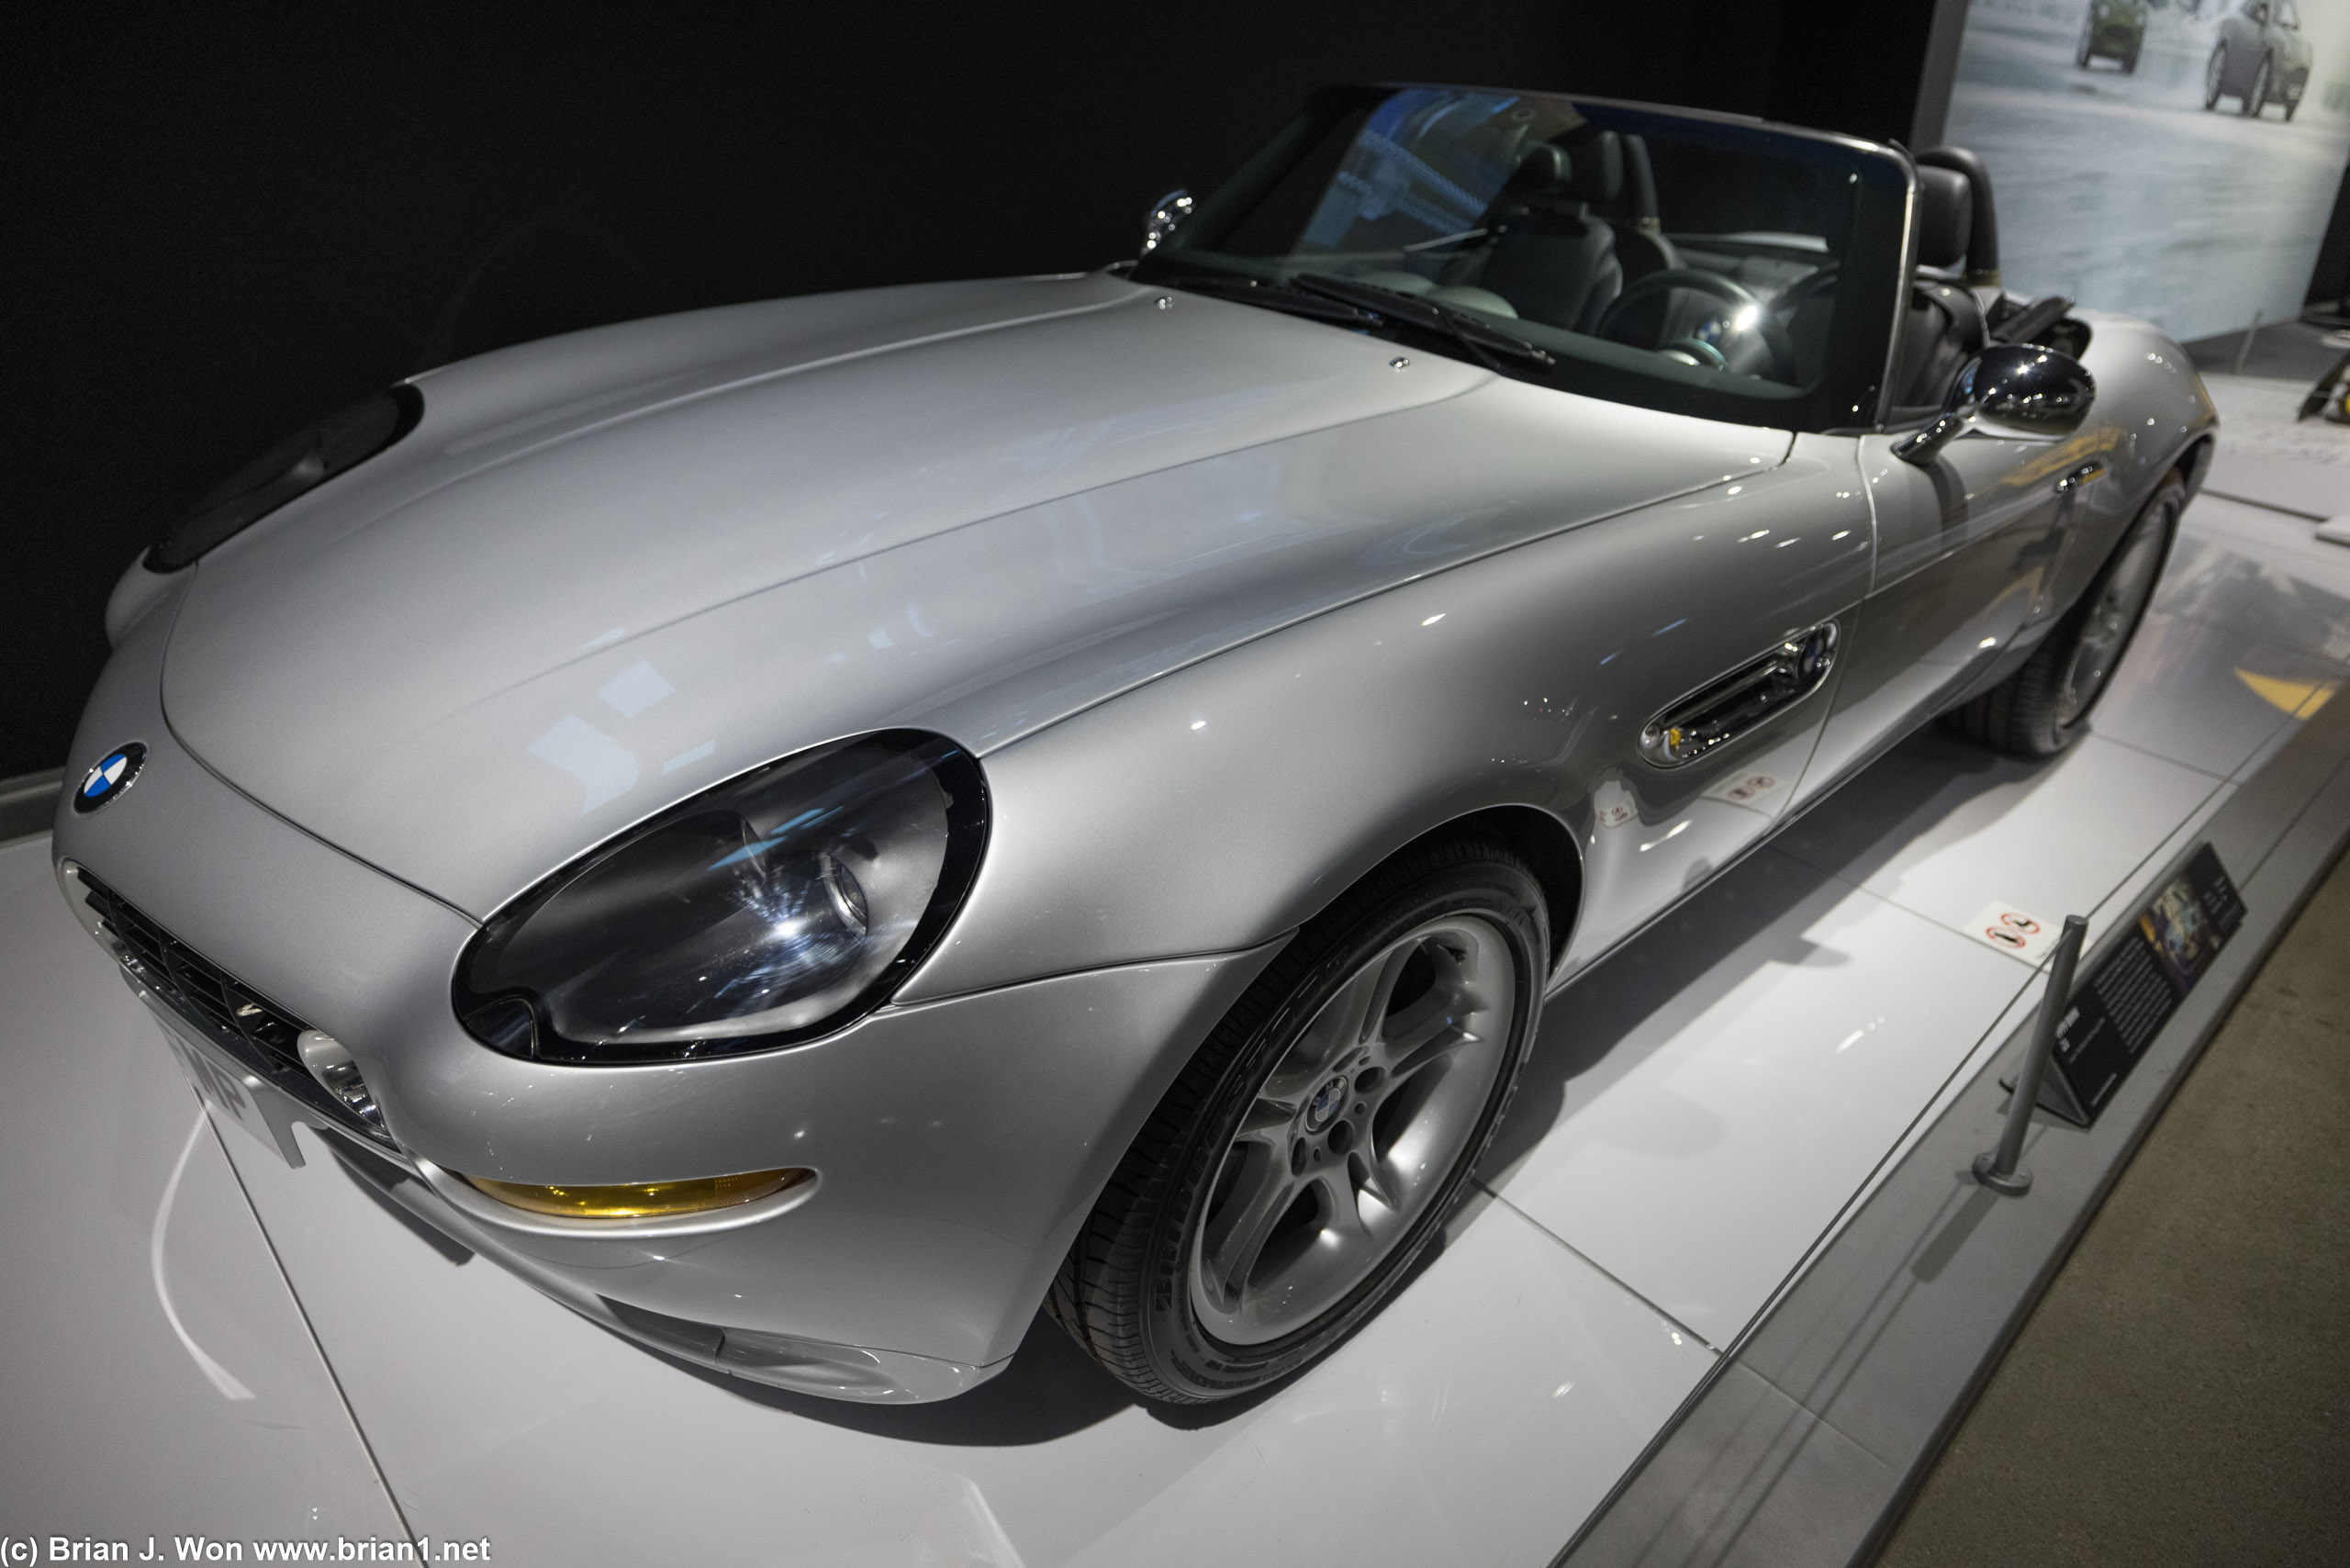 1999 BMW Z8 from The World Is Not Enough.